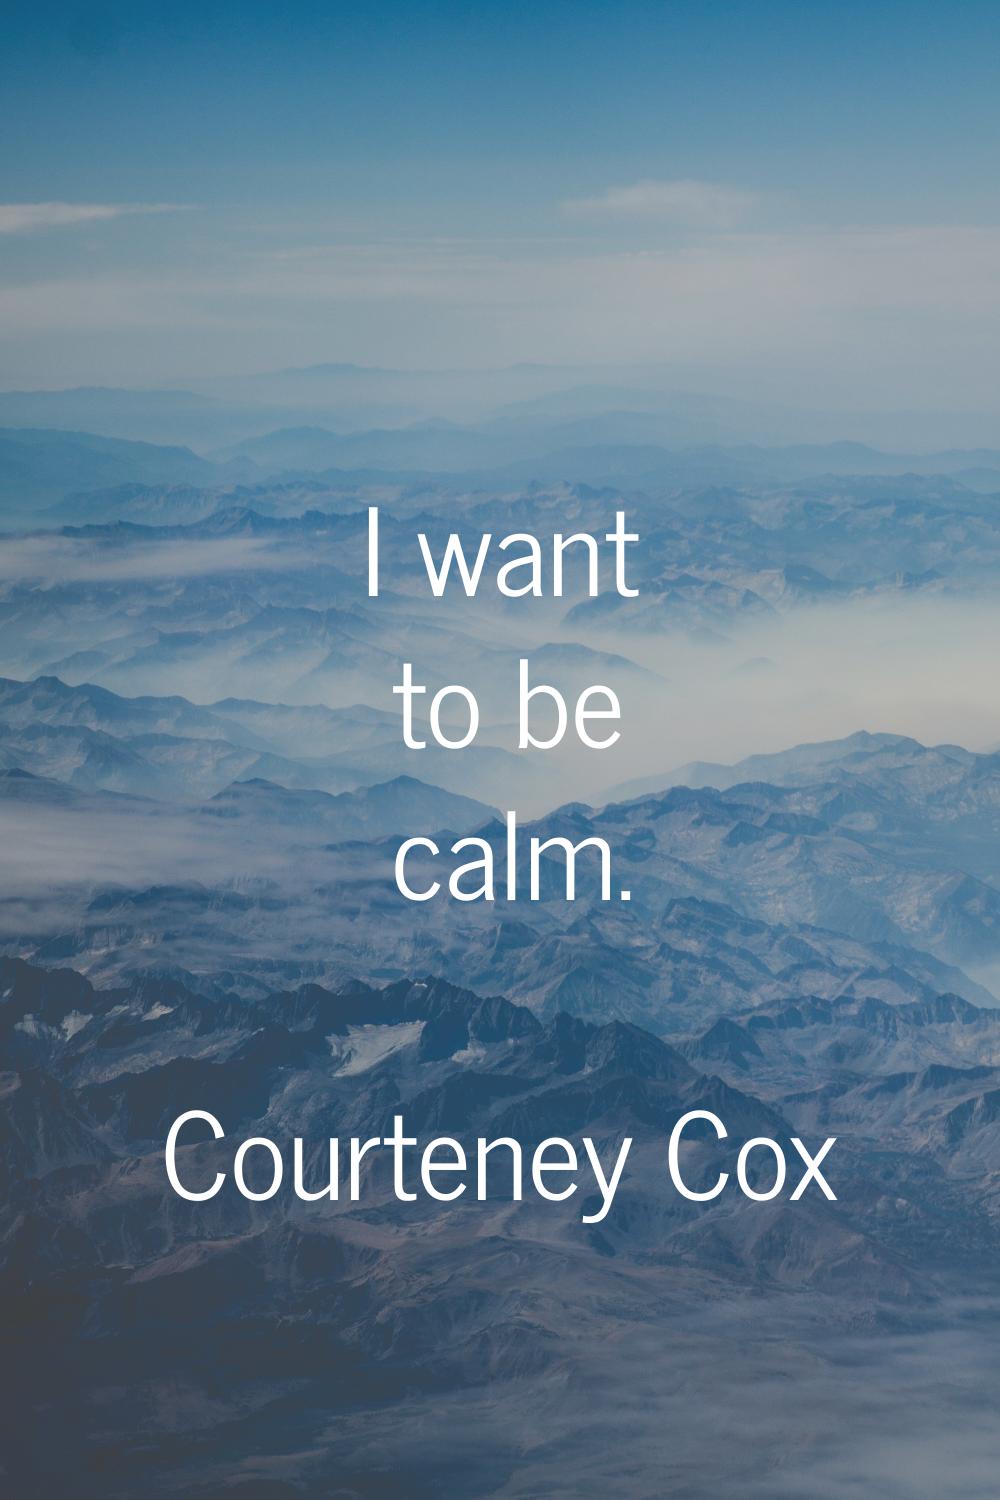 I want to be calm.